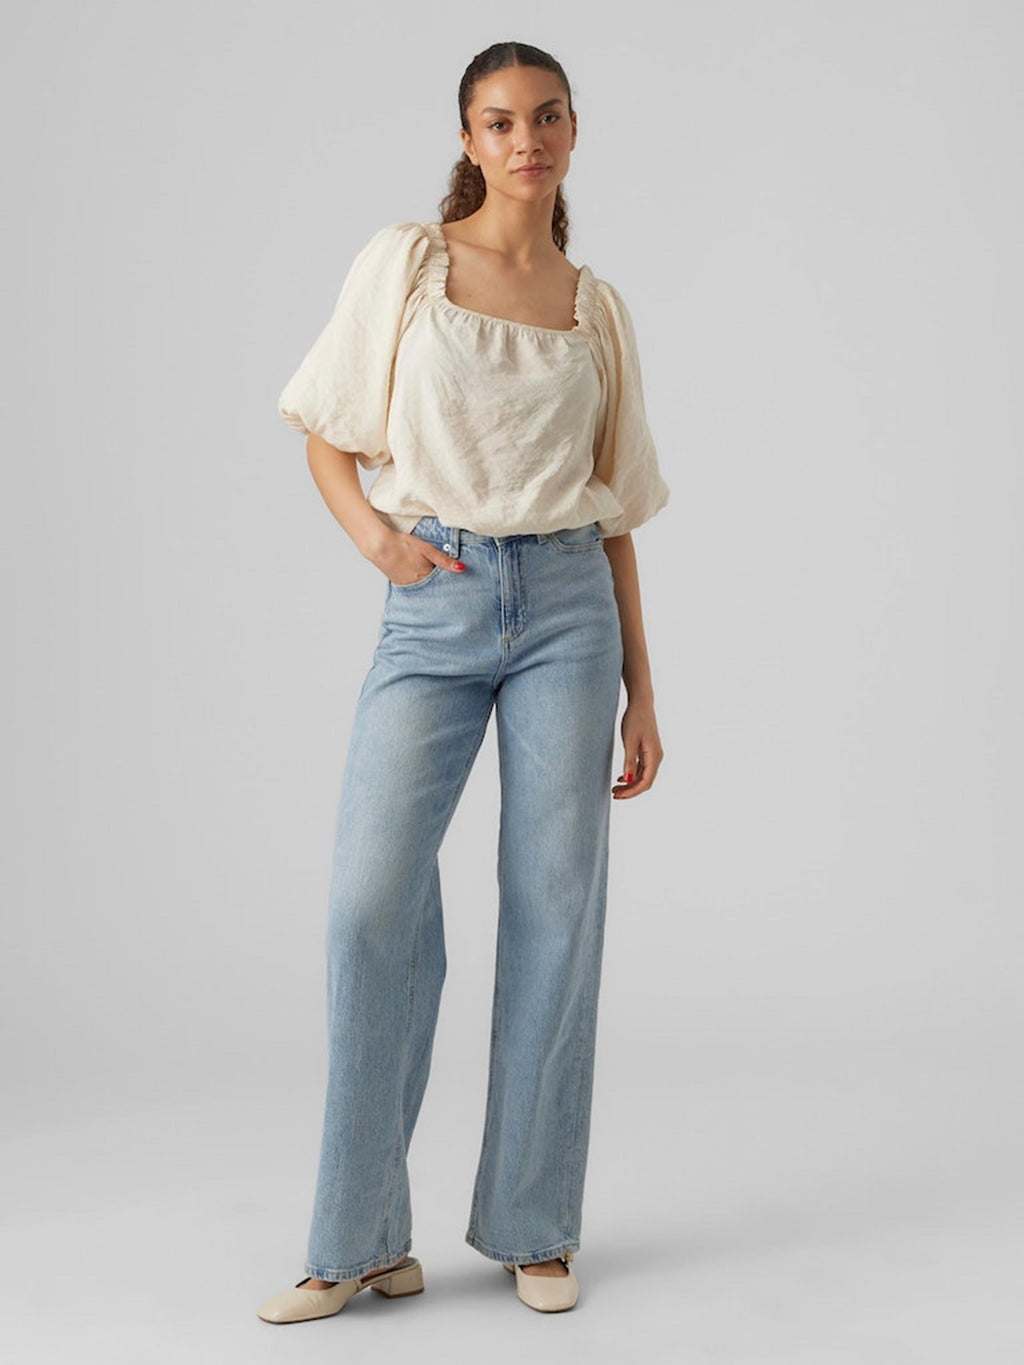 Florence Top - Birch